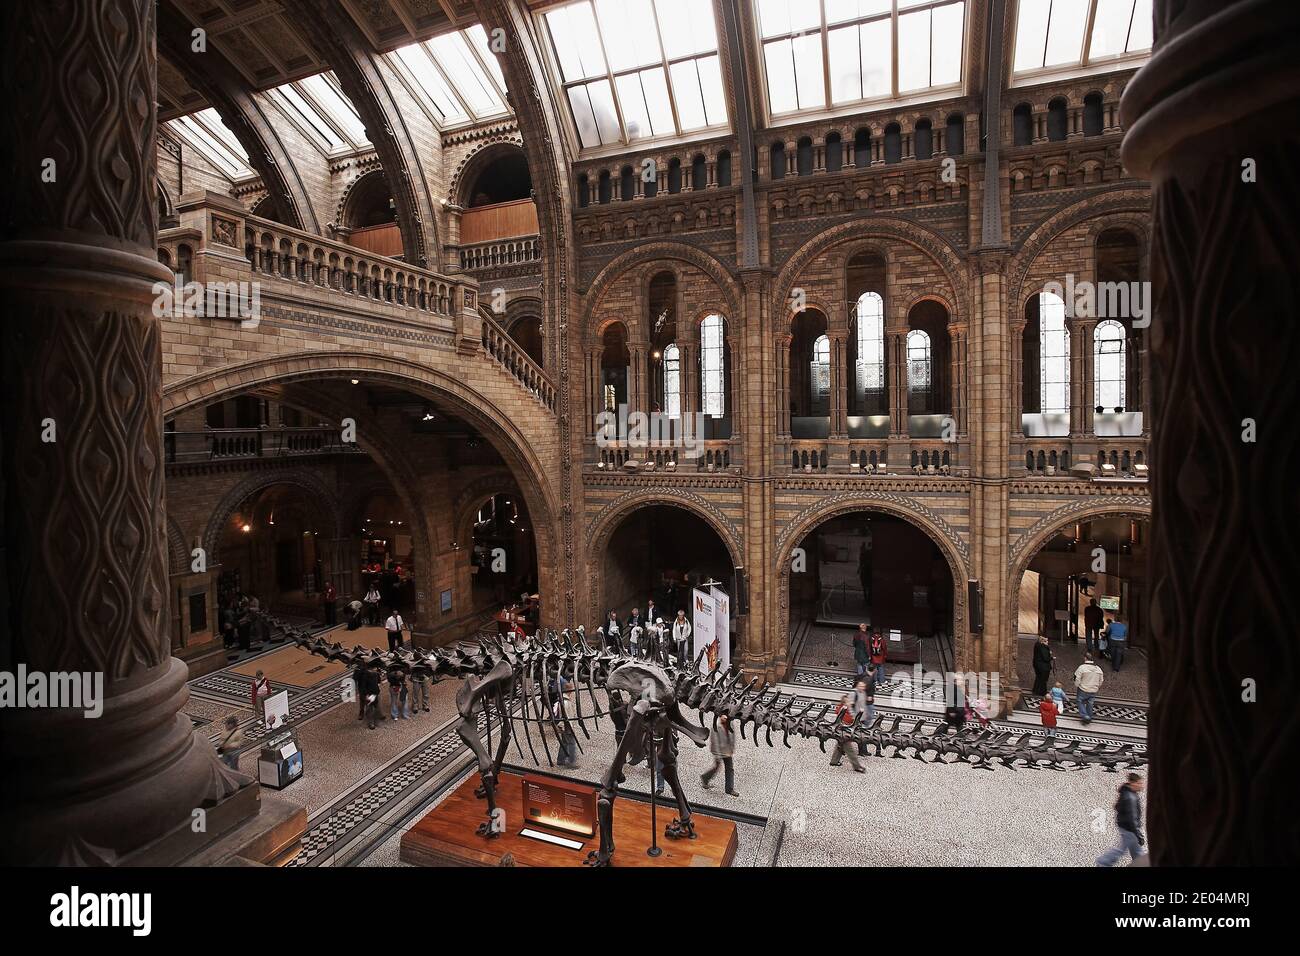 Great Britain /London / Natural History Museum in the Central Hall where the "Dipldocus" is standing Stock Photo